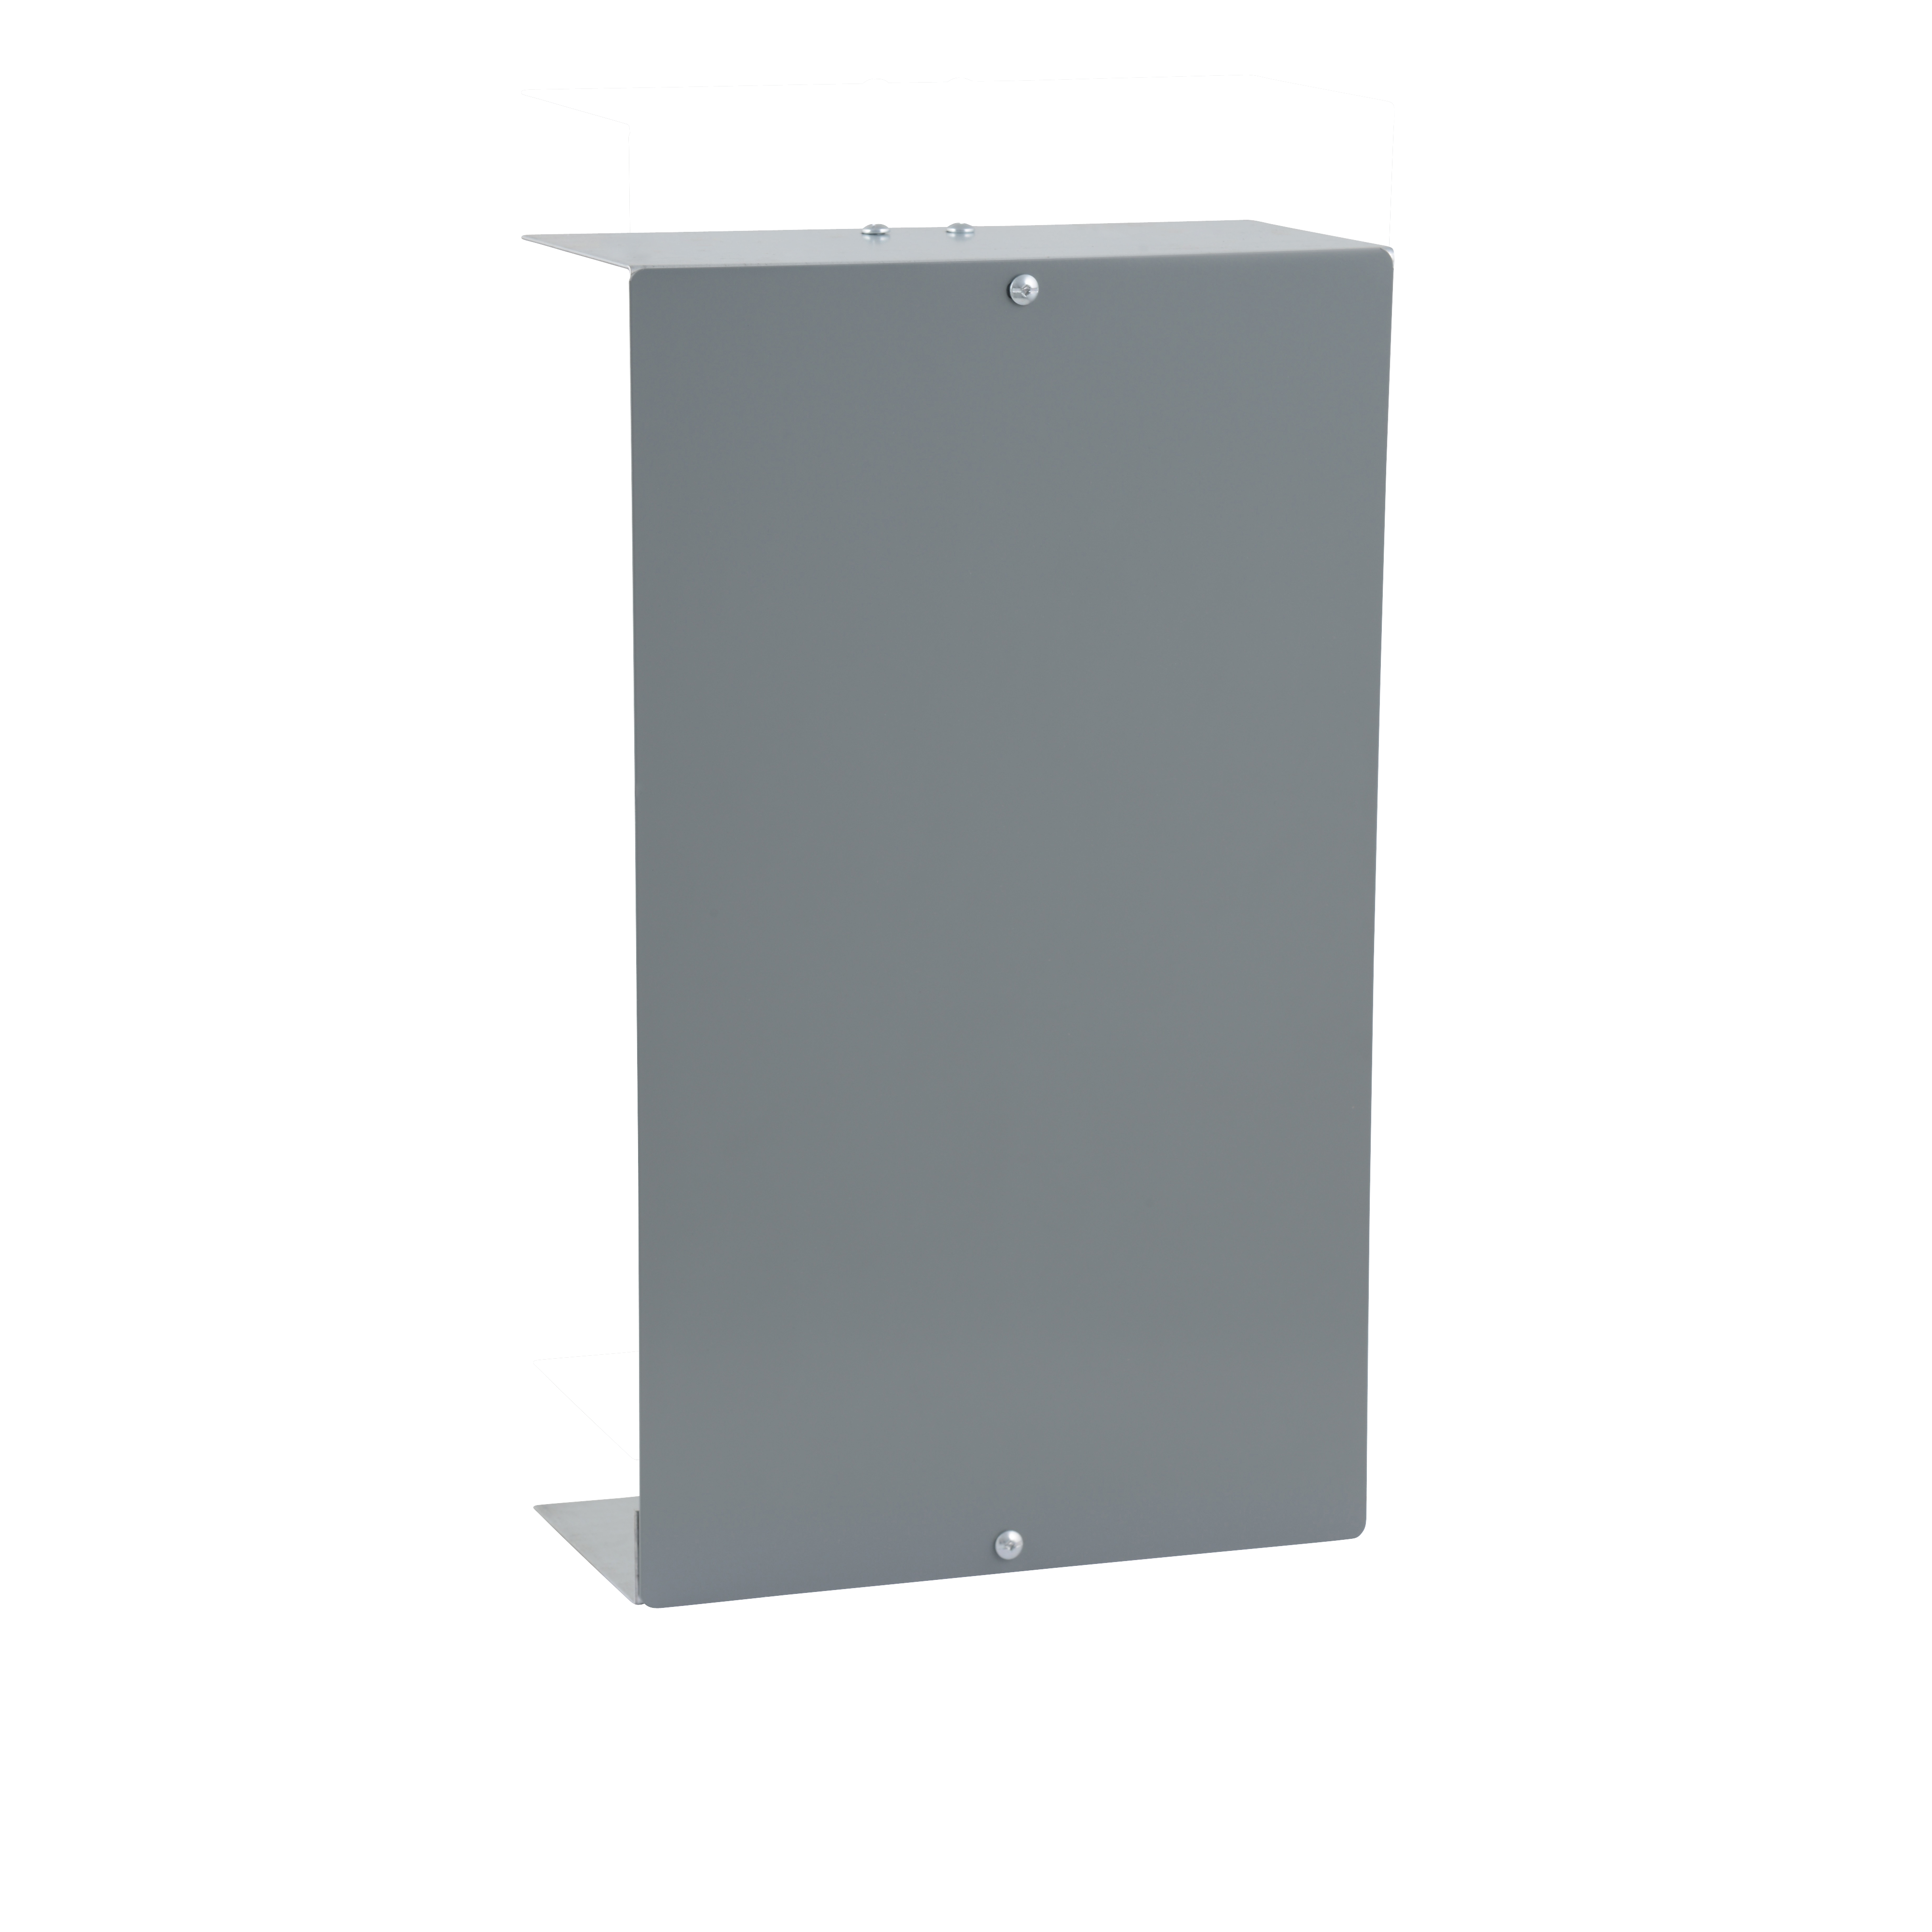 Enclosure Panel Skirt Assembly, NQNF, Type 1, 20x16x5.75in